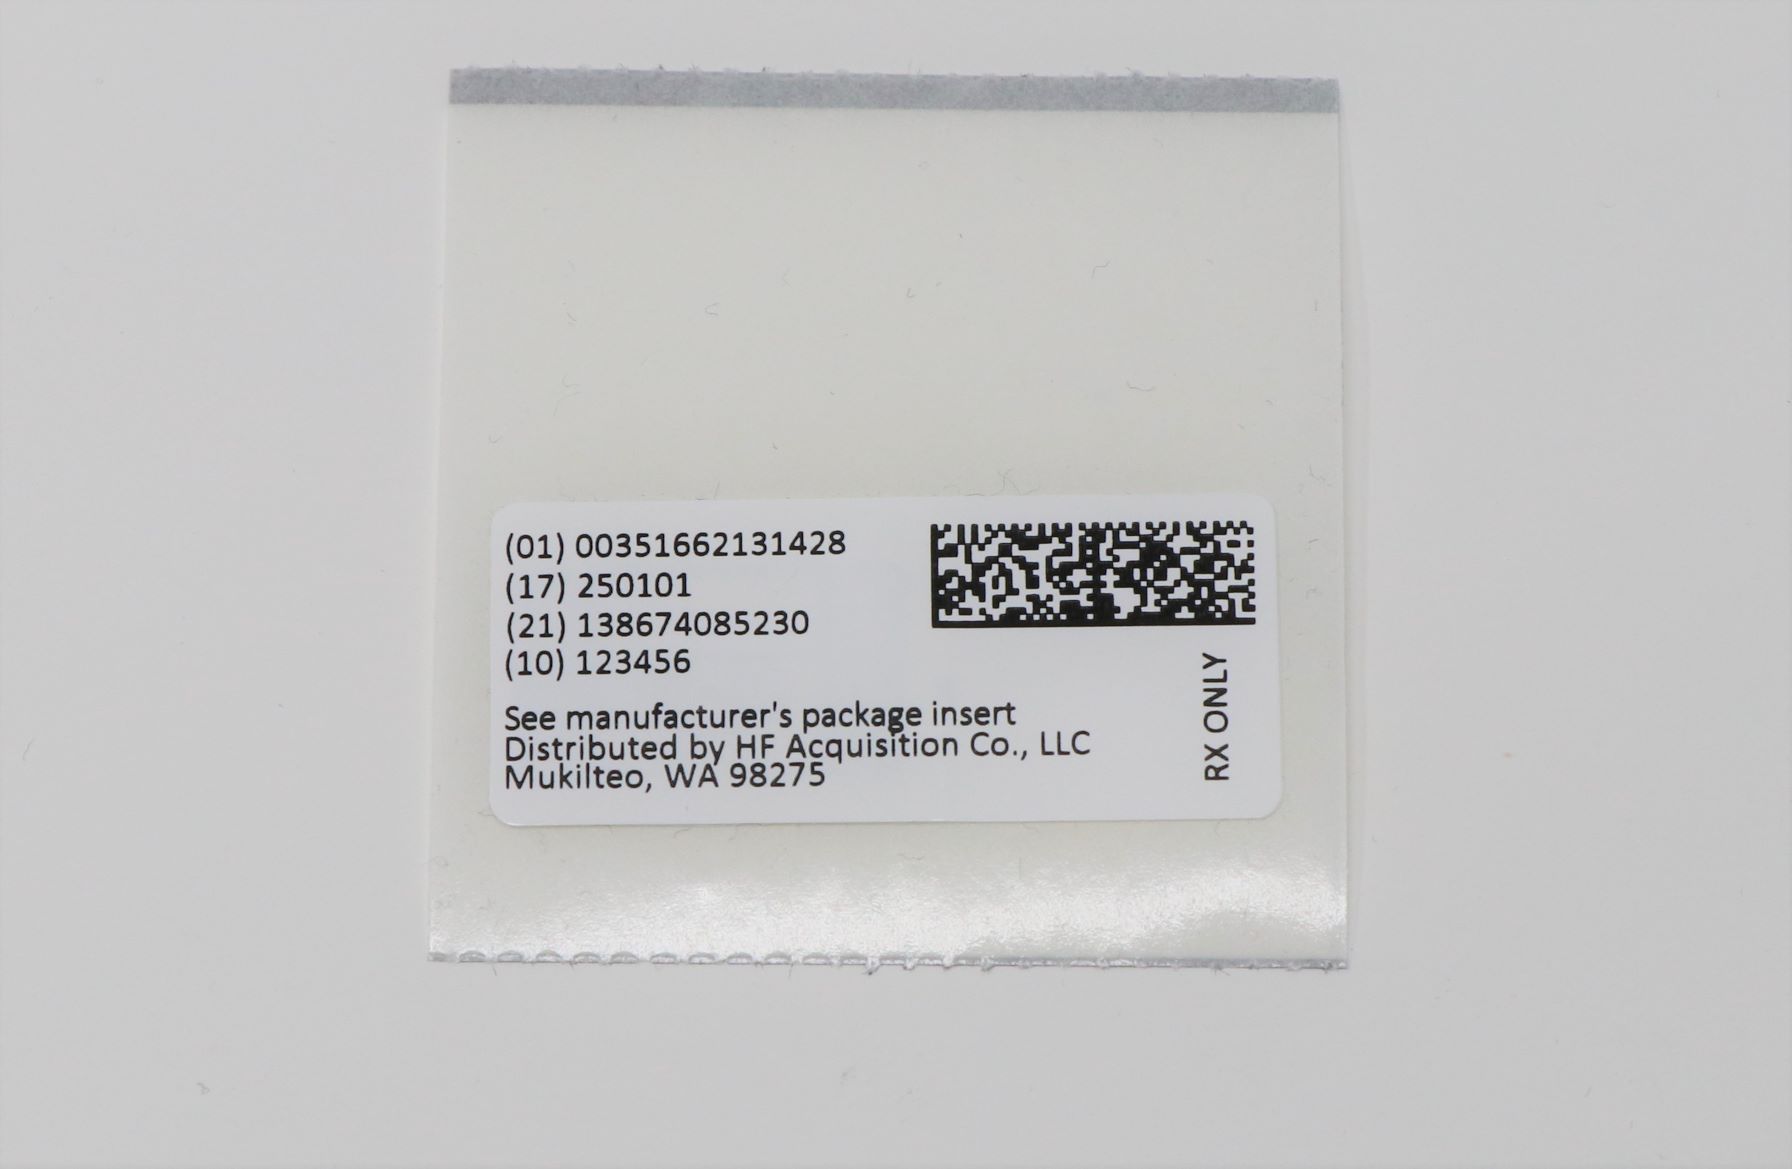 SERIALIZED RFID LABELING